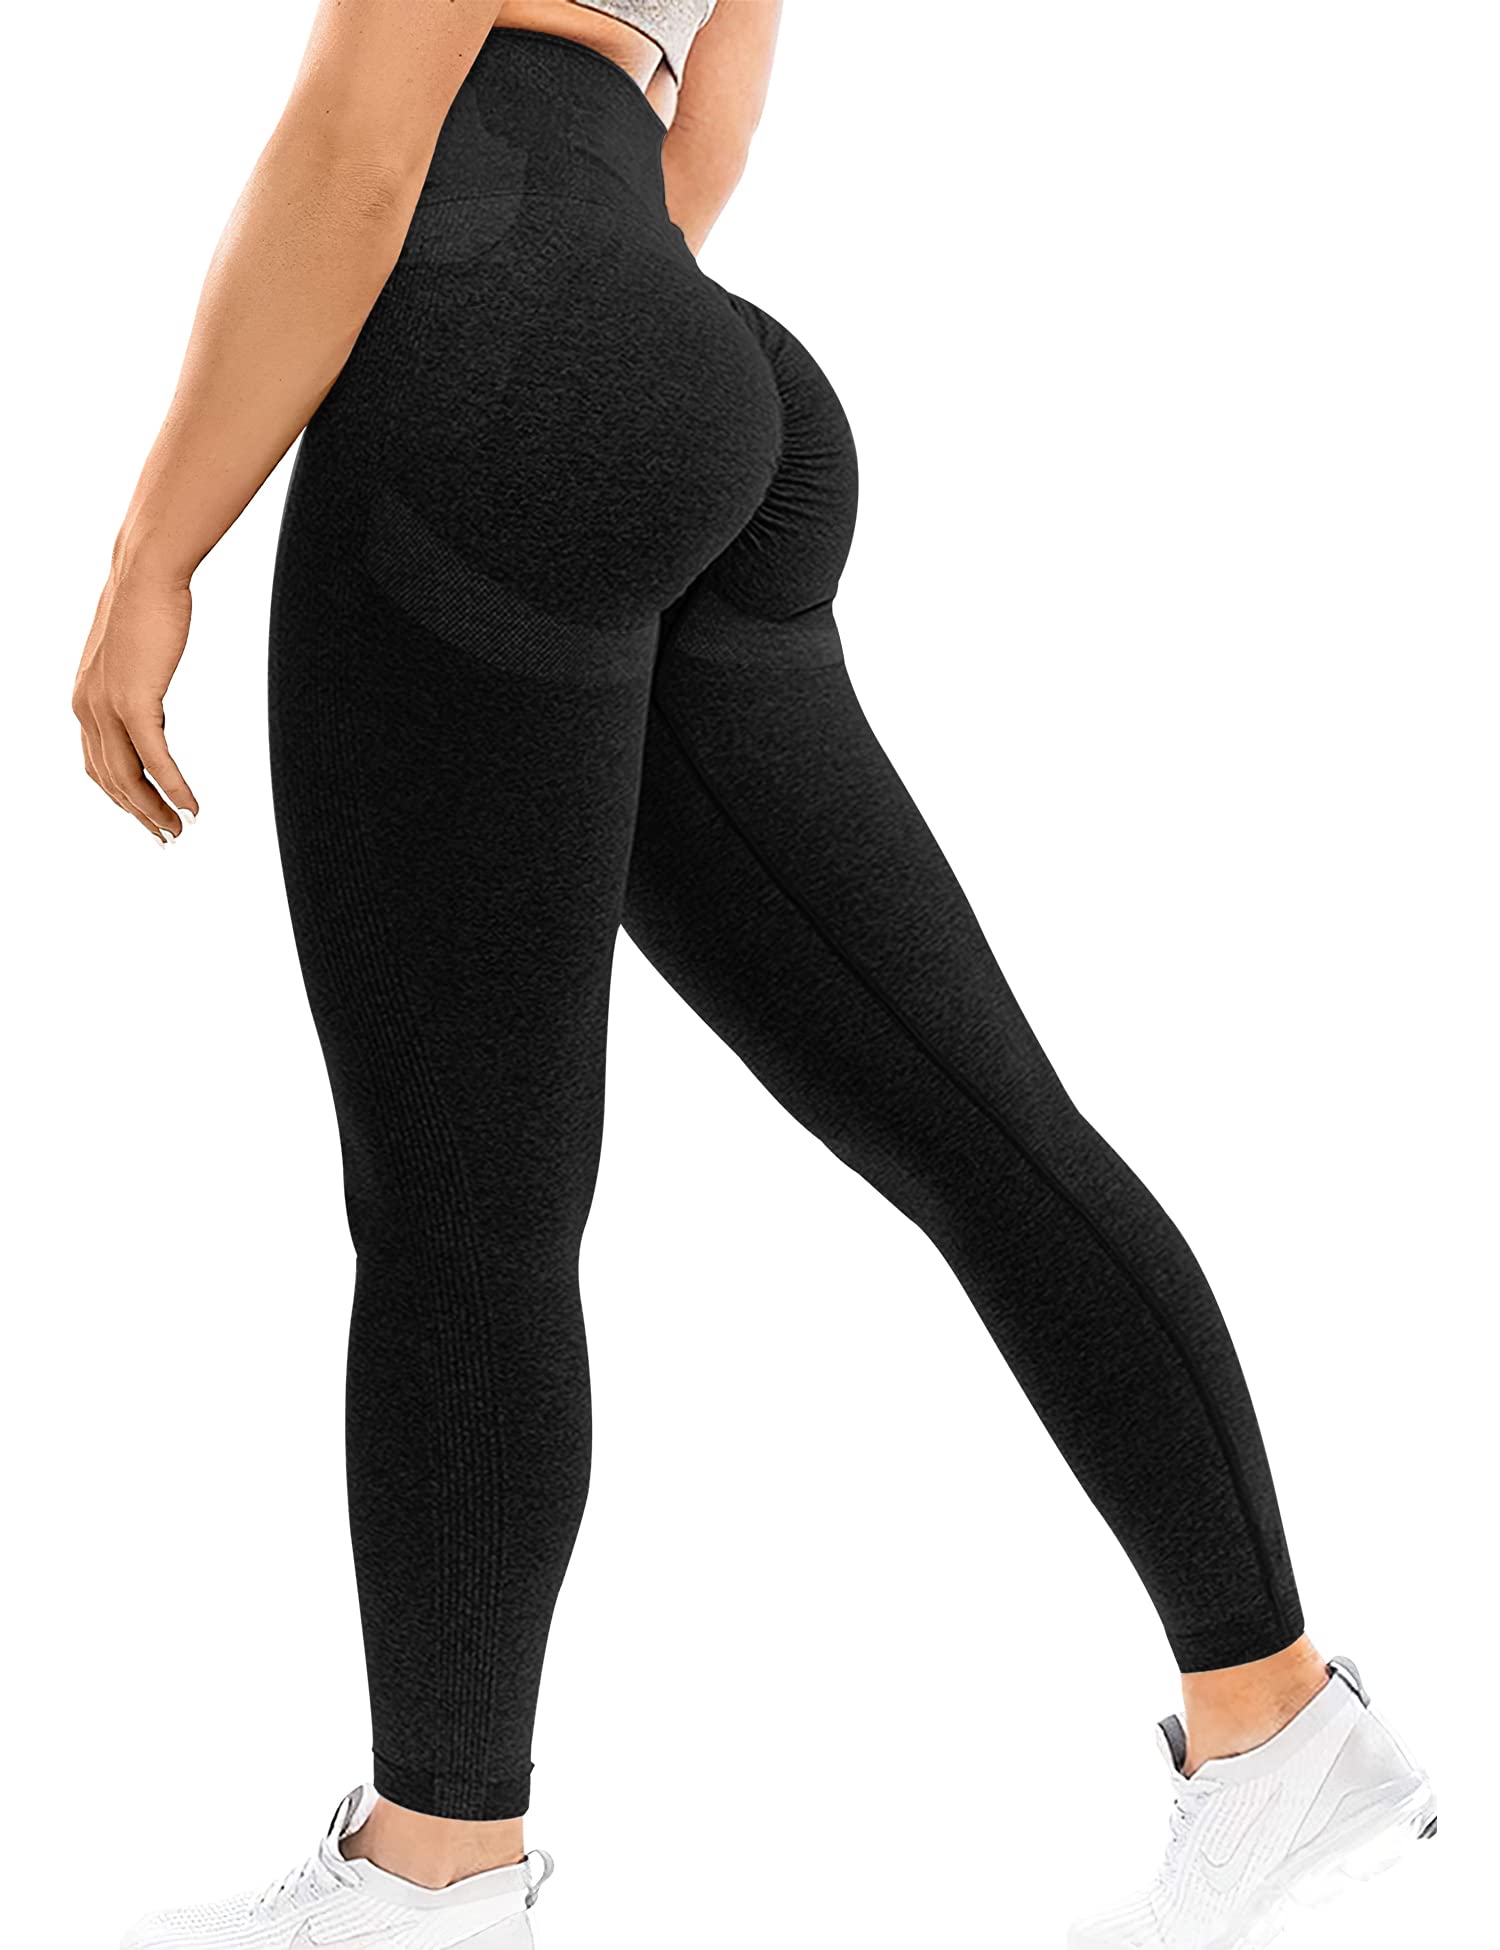 CAICJ98 Womens Leggings Cotton Scrunch Lift Leggings for Women Workout Yoga  Pants Ruched Booty High Waist Seamless Leggings Compression Tights Black